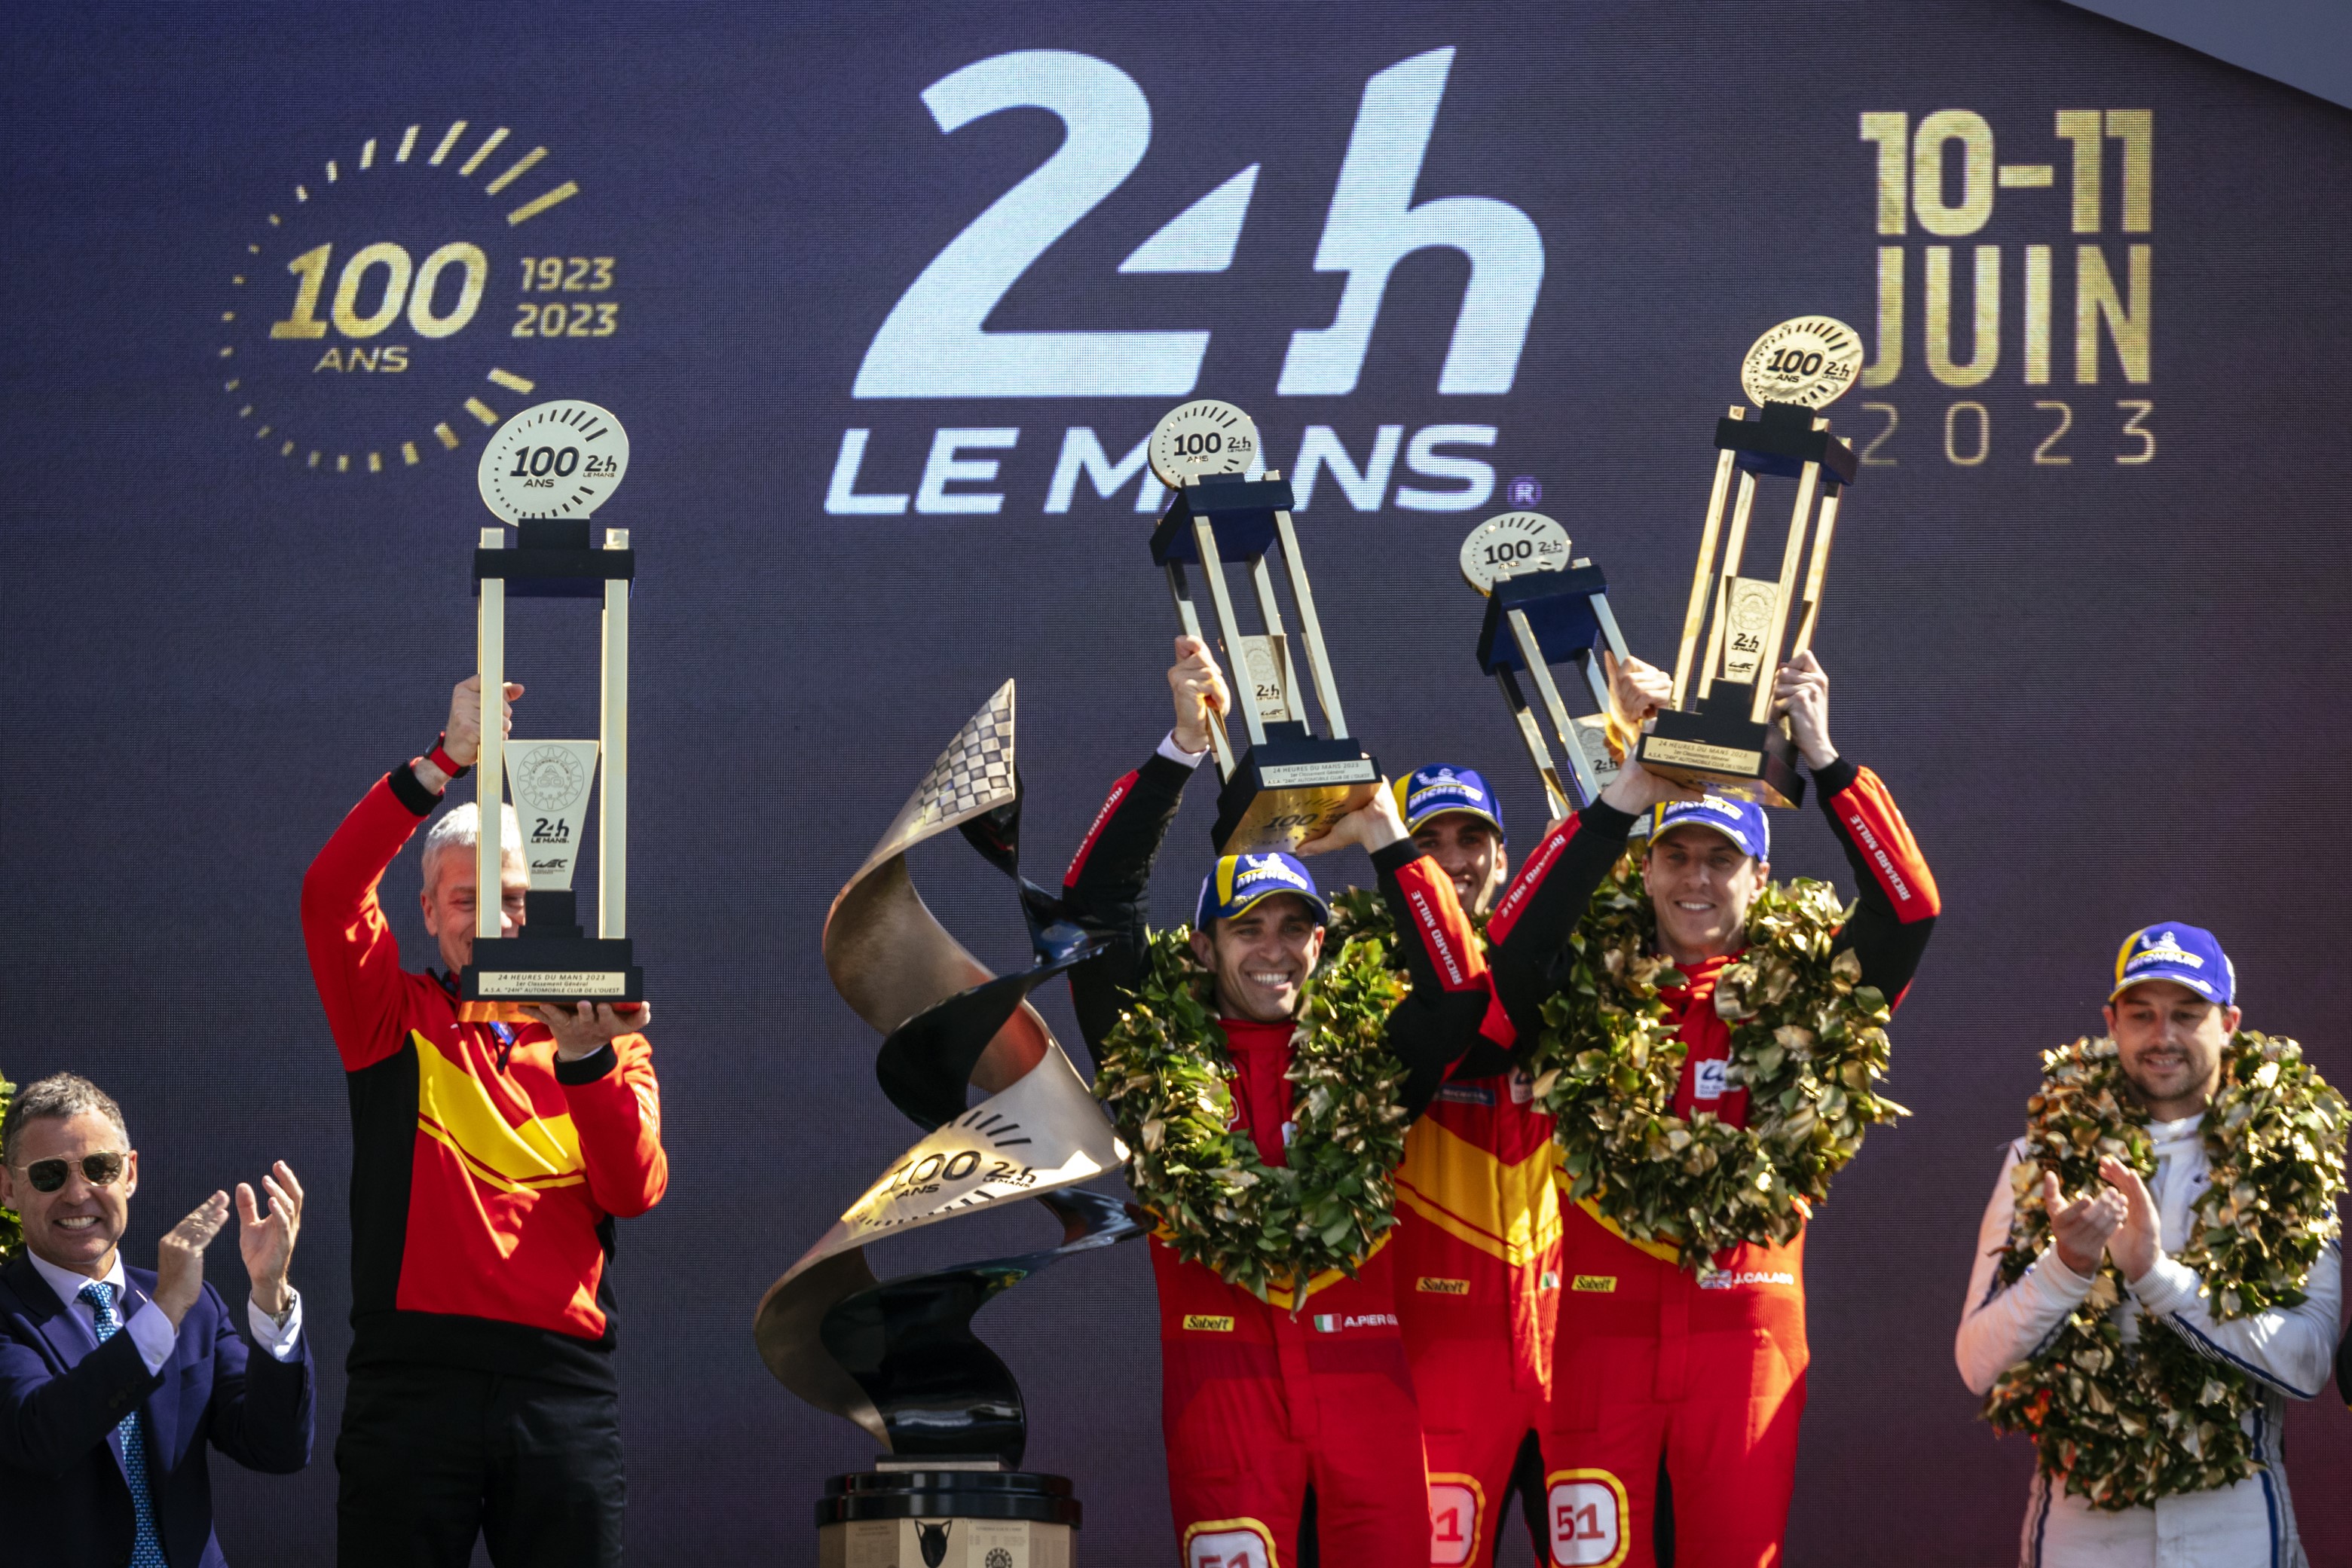 Ferrari's Le Mans success cannot mask their ongoing F1 struggles